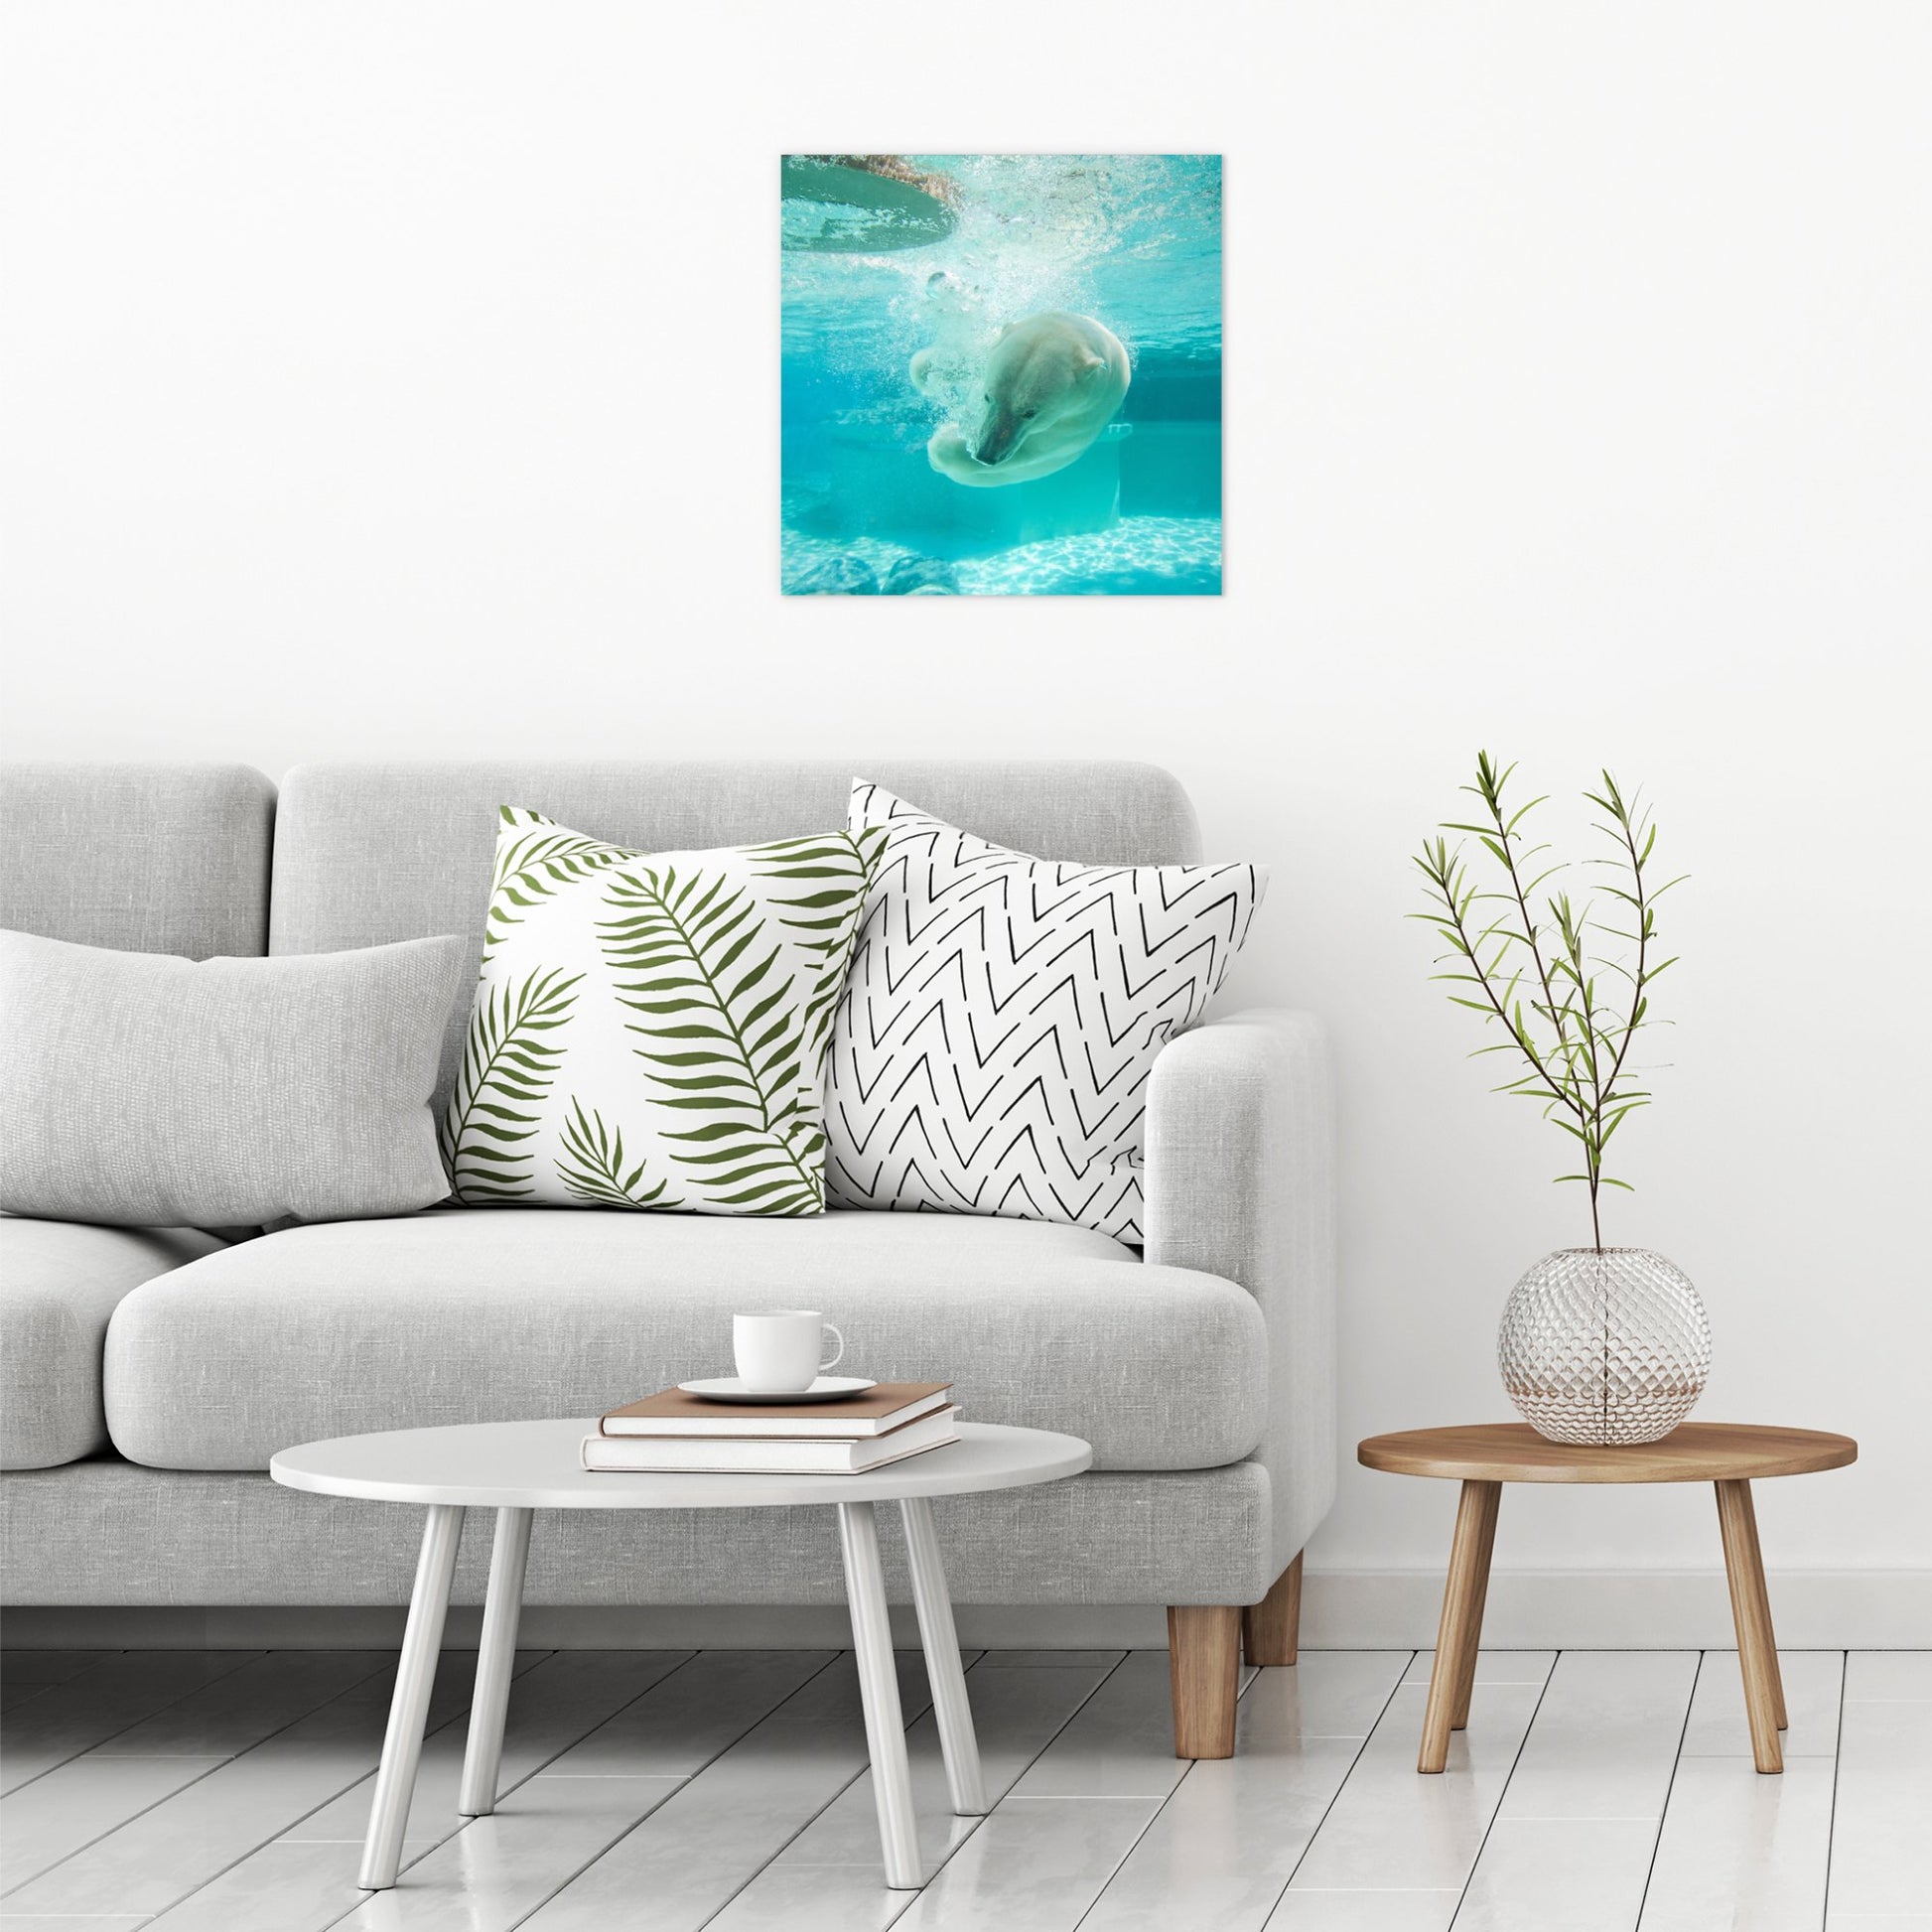 A contemporary modern room view showing a large size metal art poster display plate with printed design of a Polar Bear Under Water